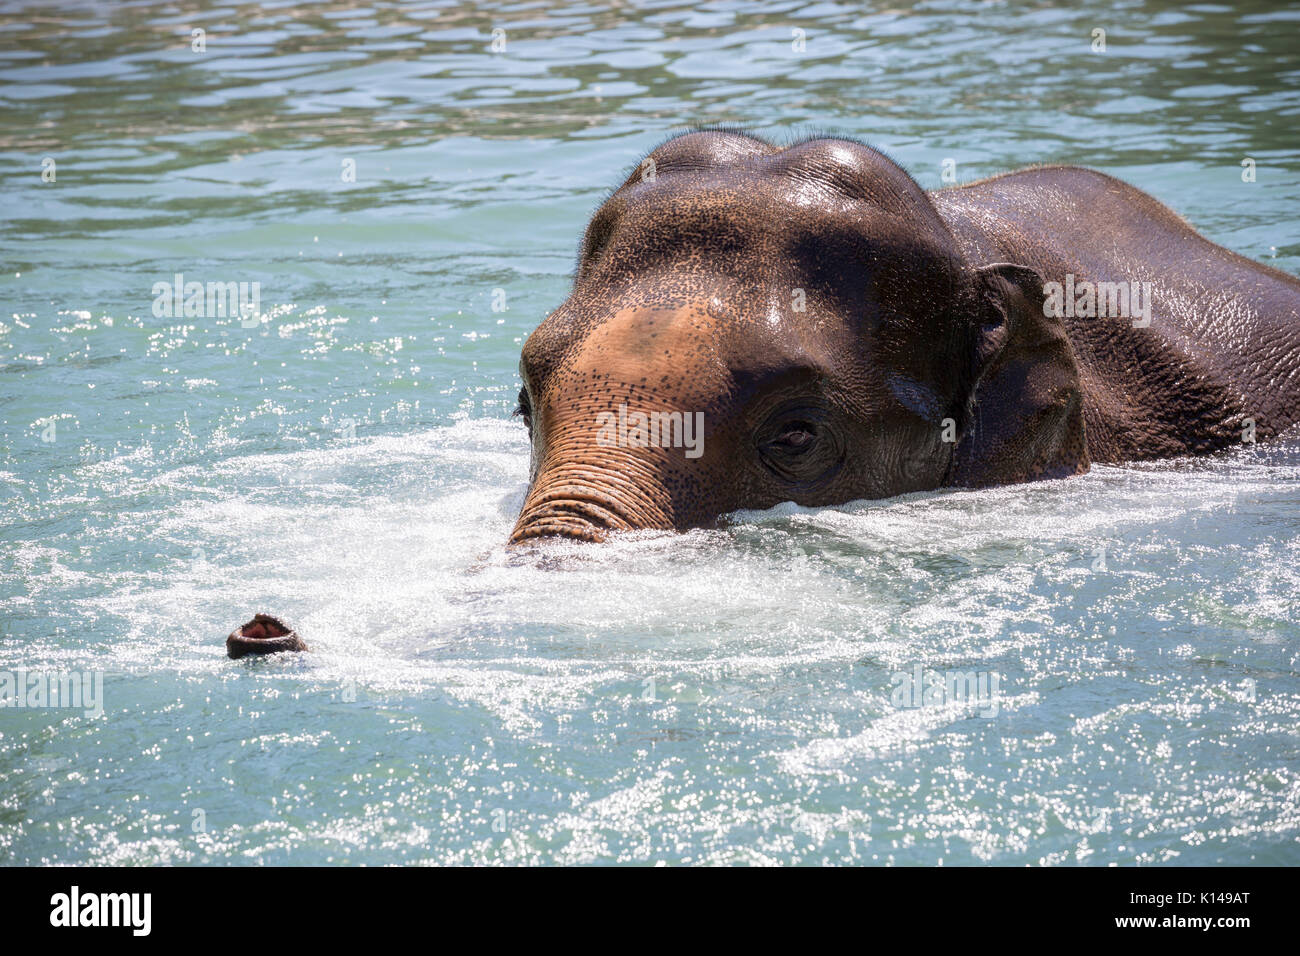 Elephant in the water at the Portland Oregon zoo Stock Photo